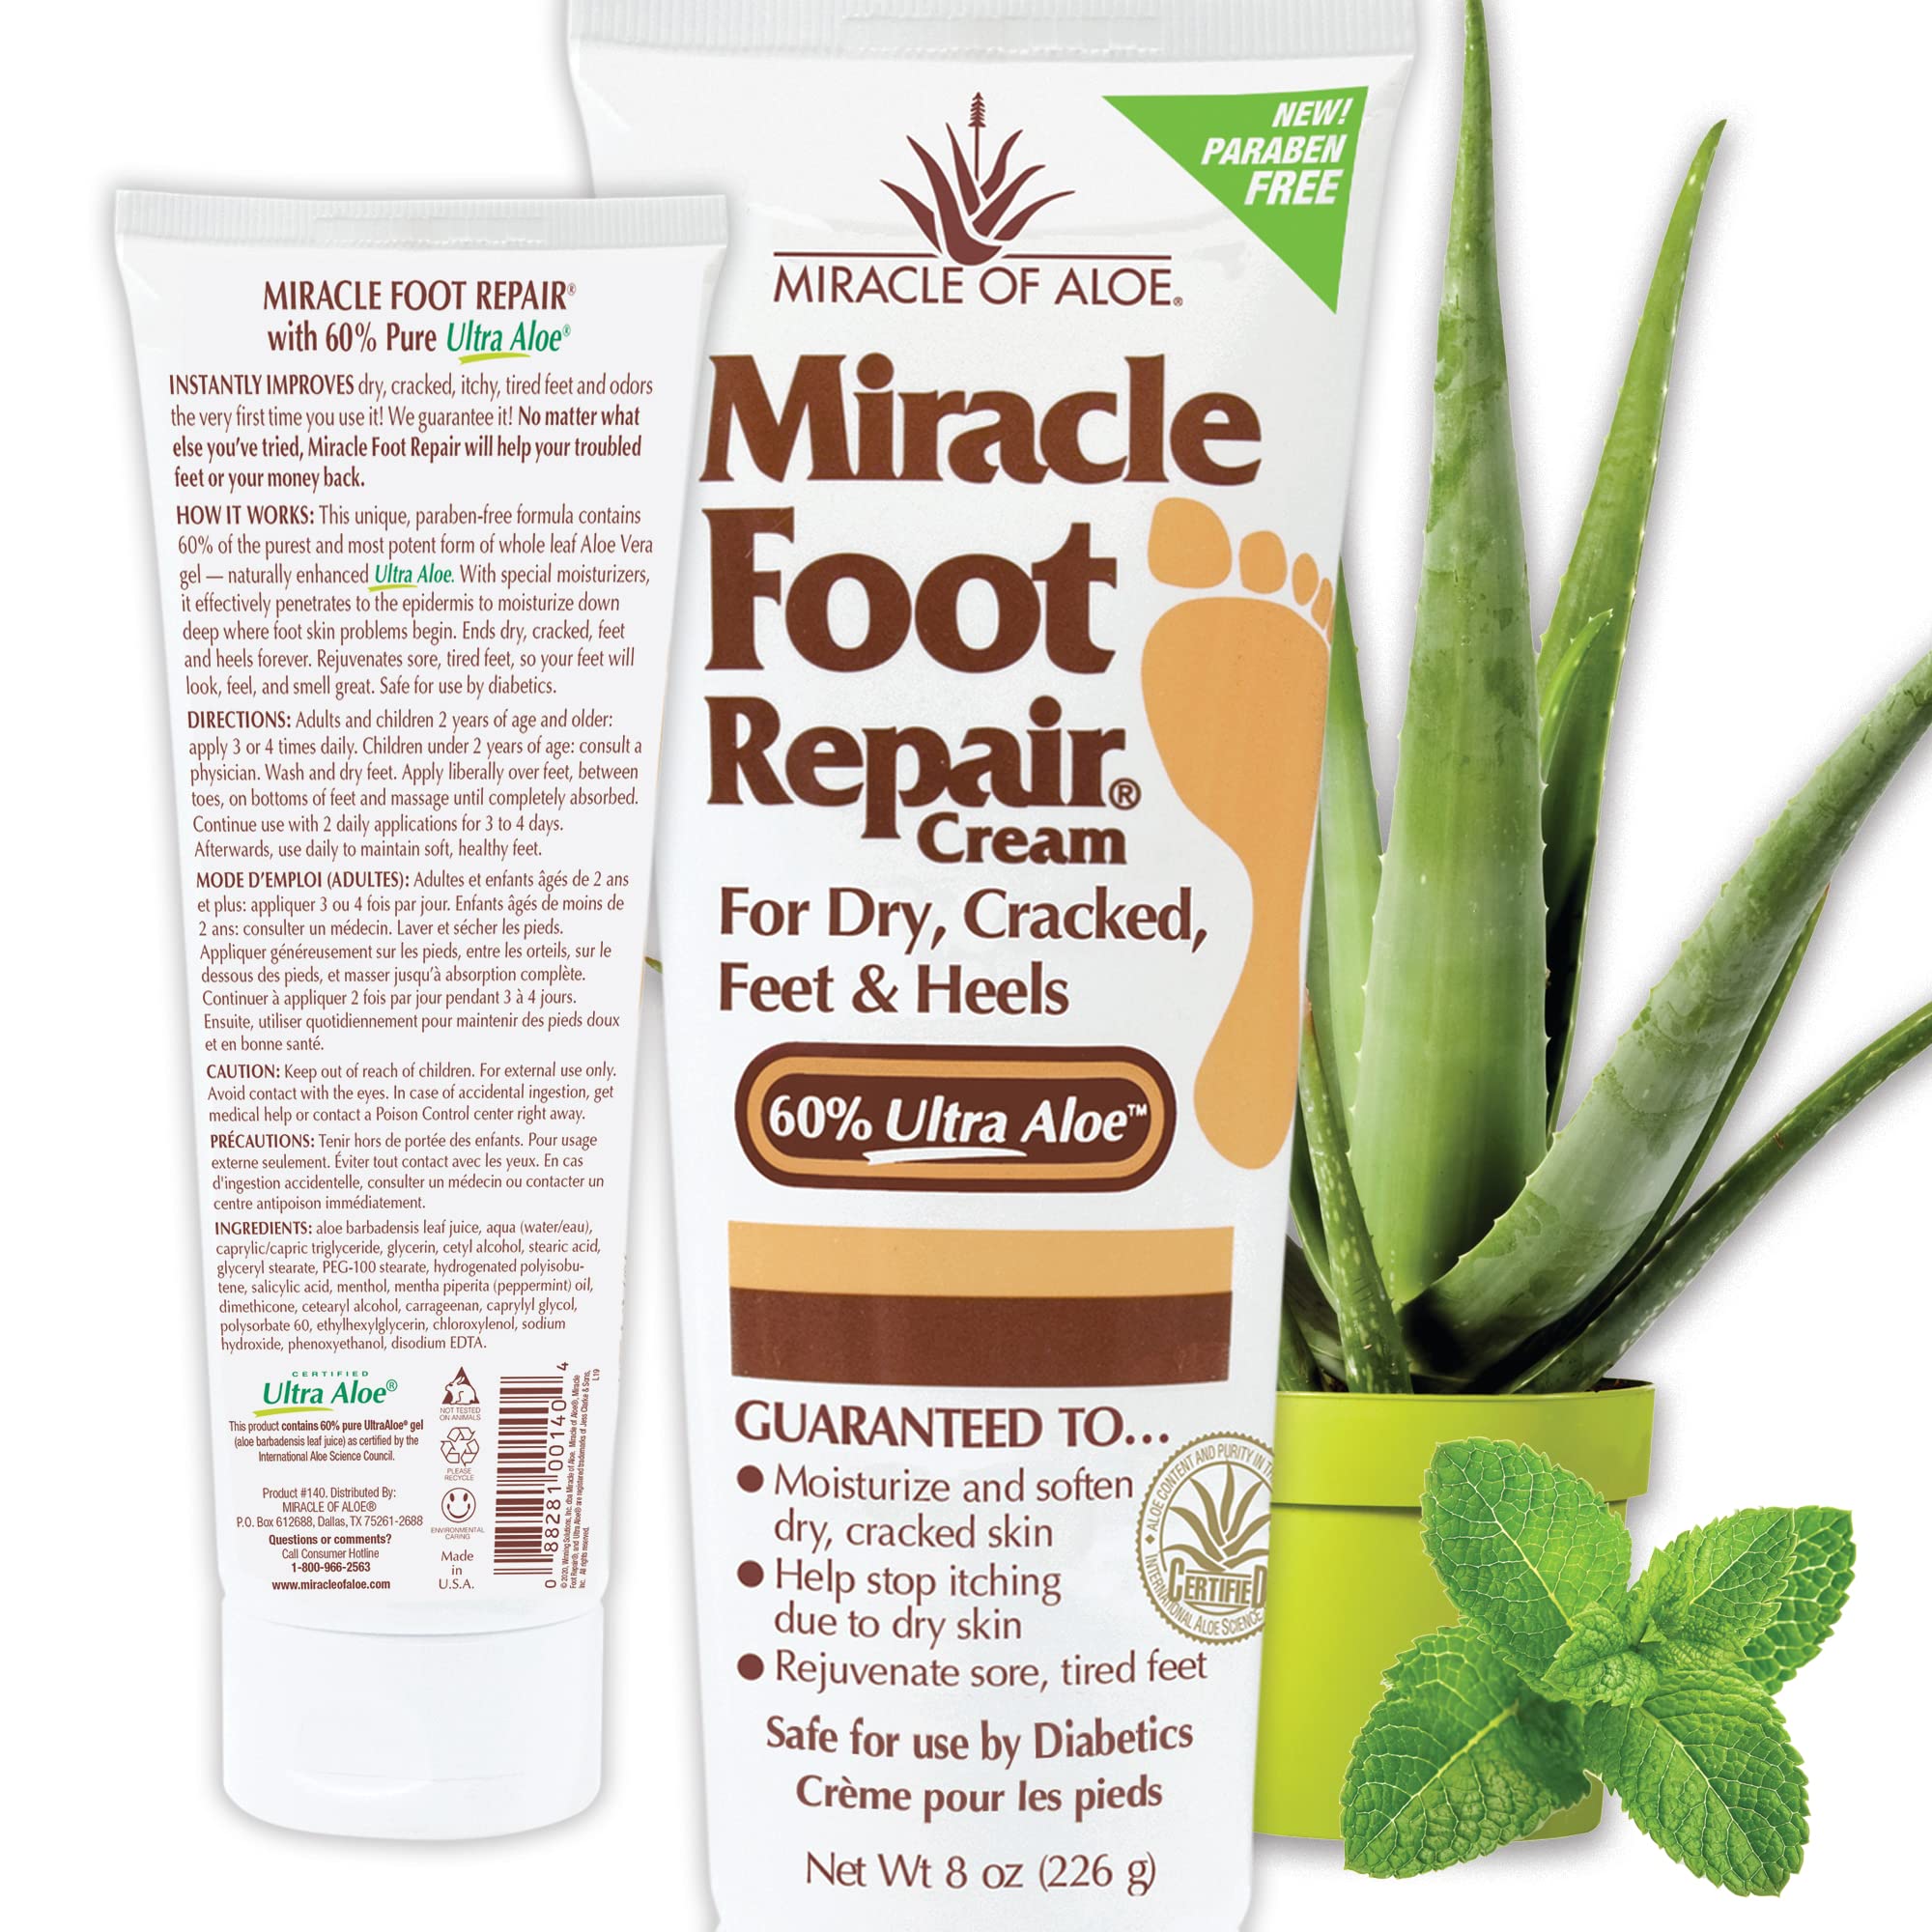 Miracle Foot Repair Cream, 8 oz Repairs Dry Cracked Heels and Feet, Diabetic-Safe, 60% Pure Ultra Aloe Moisturizes, Softens, and Repairs, Relief for Athlete's Foot and Ingrown Toenails